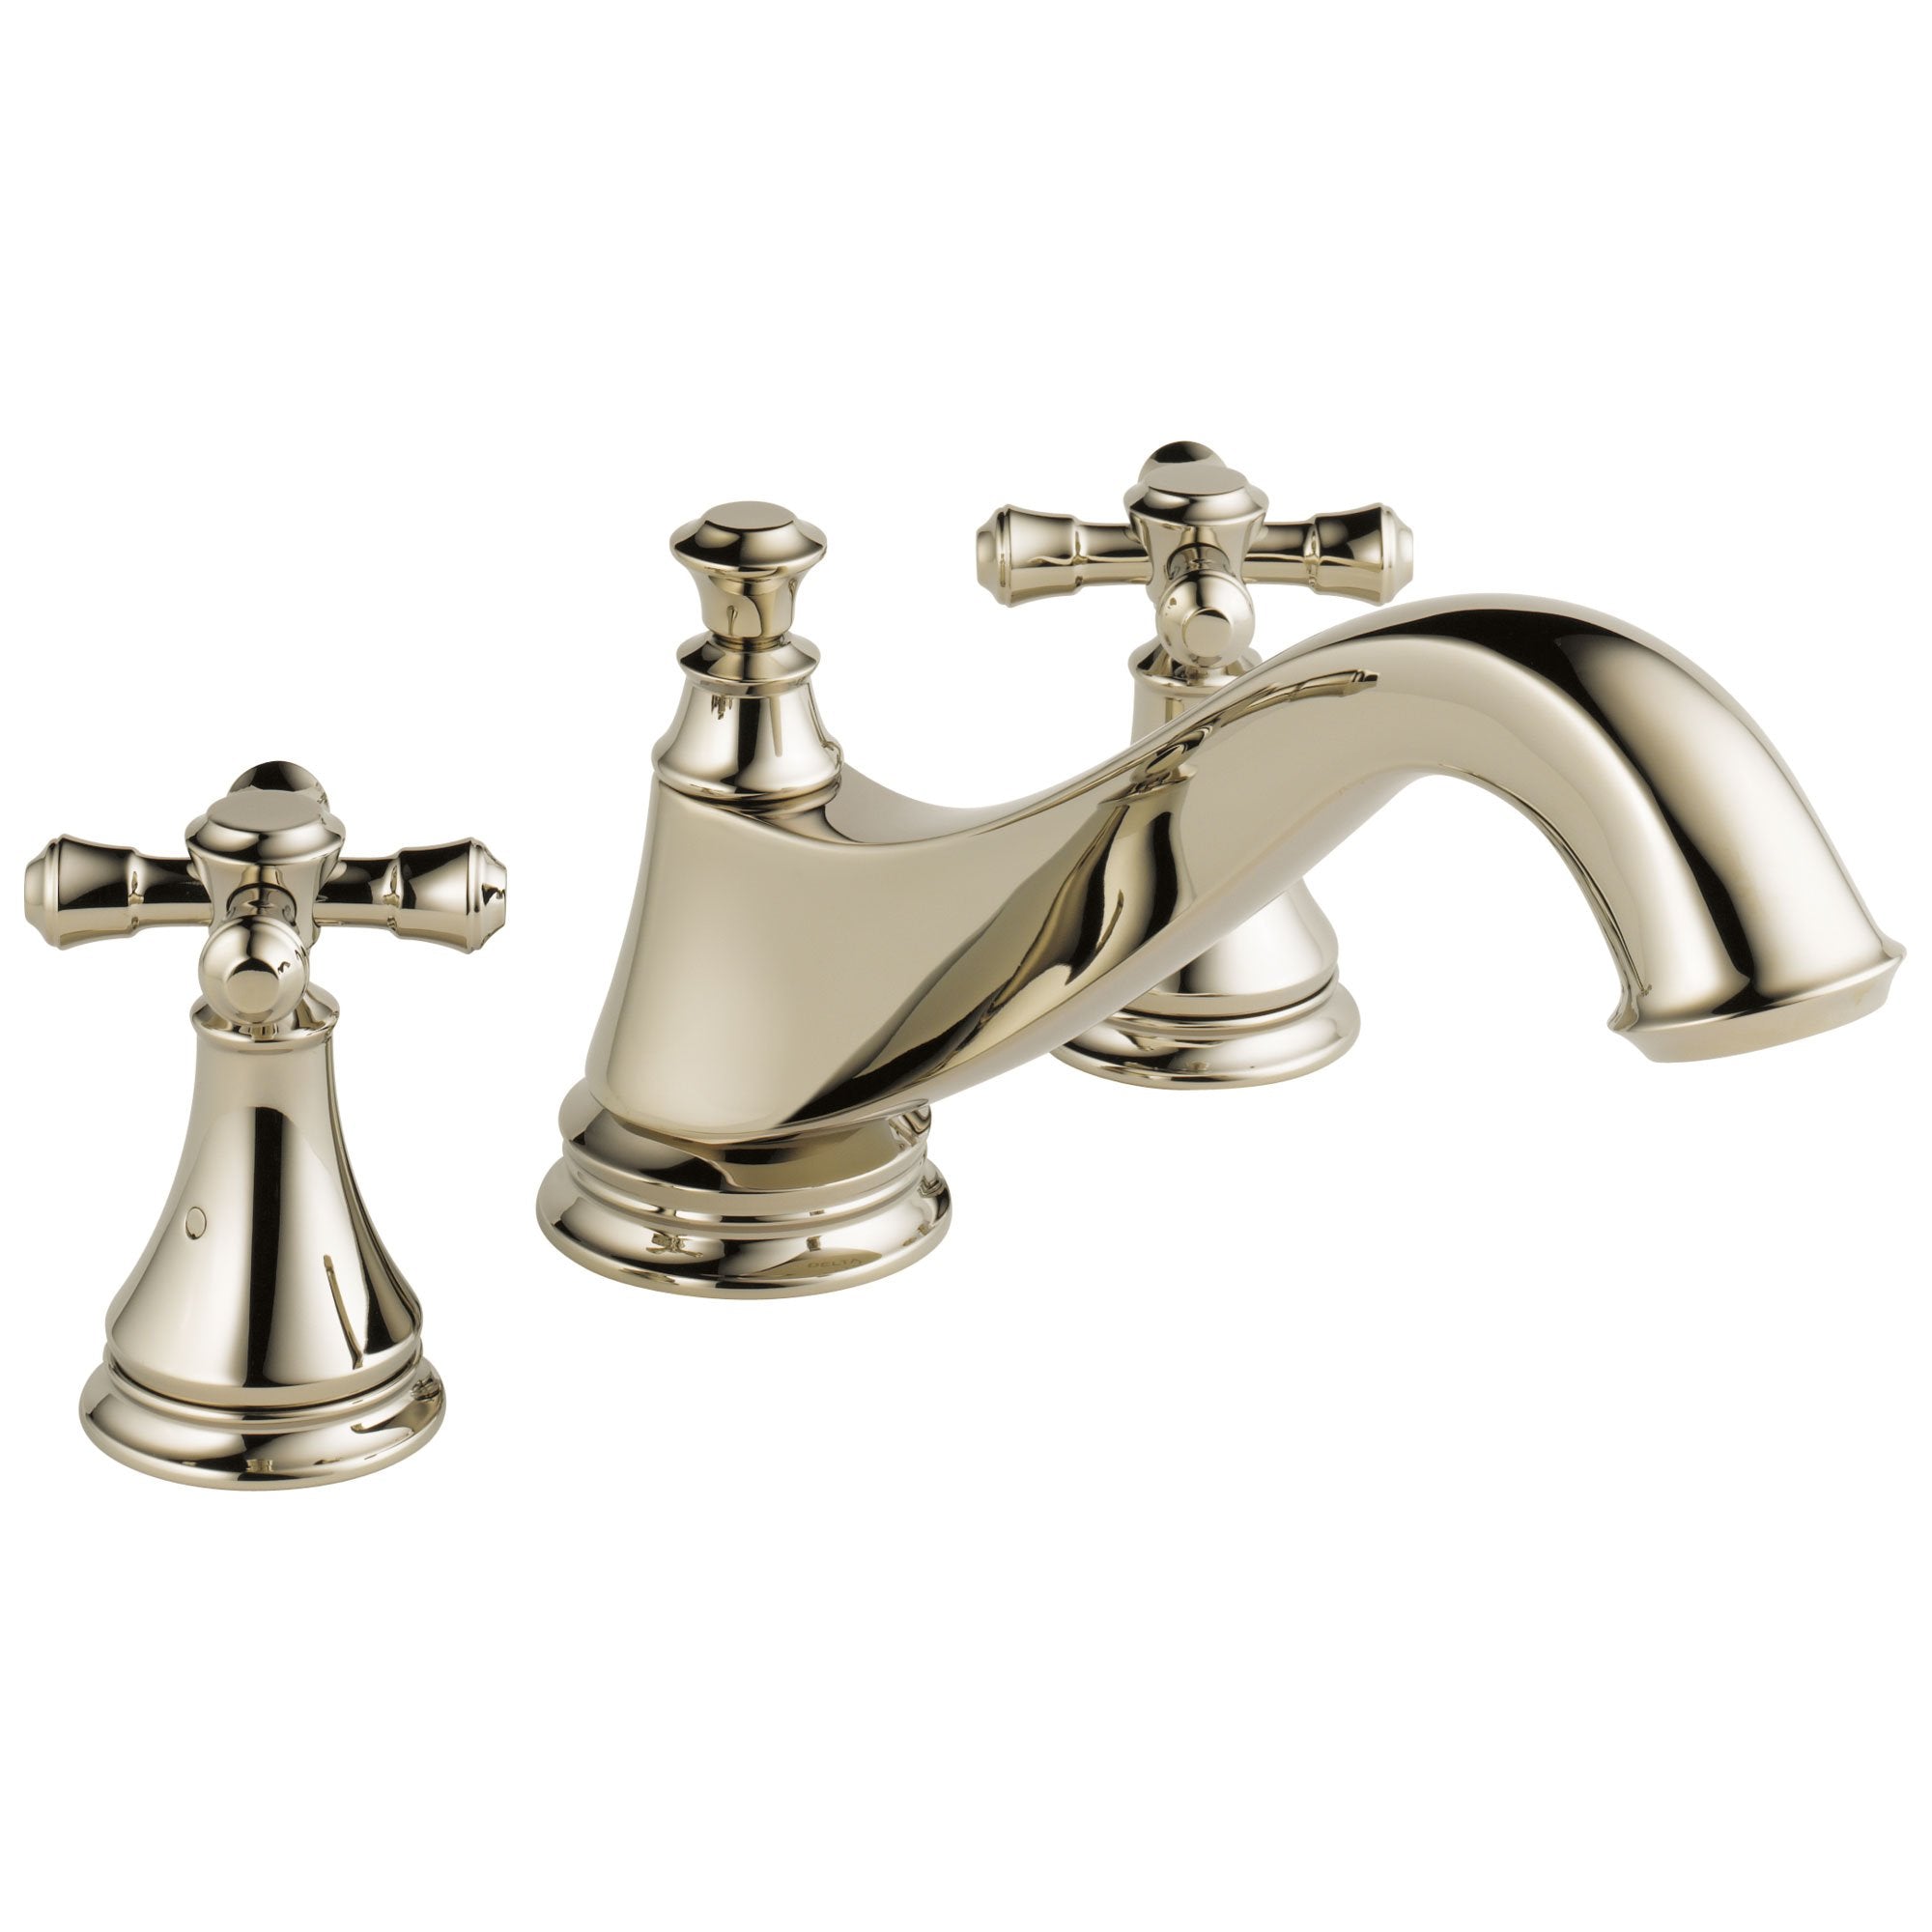 Delta Cassidy Collection Polished Nickel Finish Traditional Spout Roman Tub Filler Faucet COMPLETE ITEM Includes (2) Cross Handles and Rough-in Valve D1448V